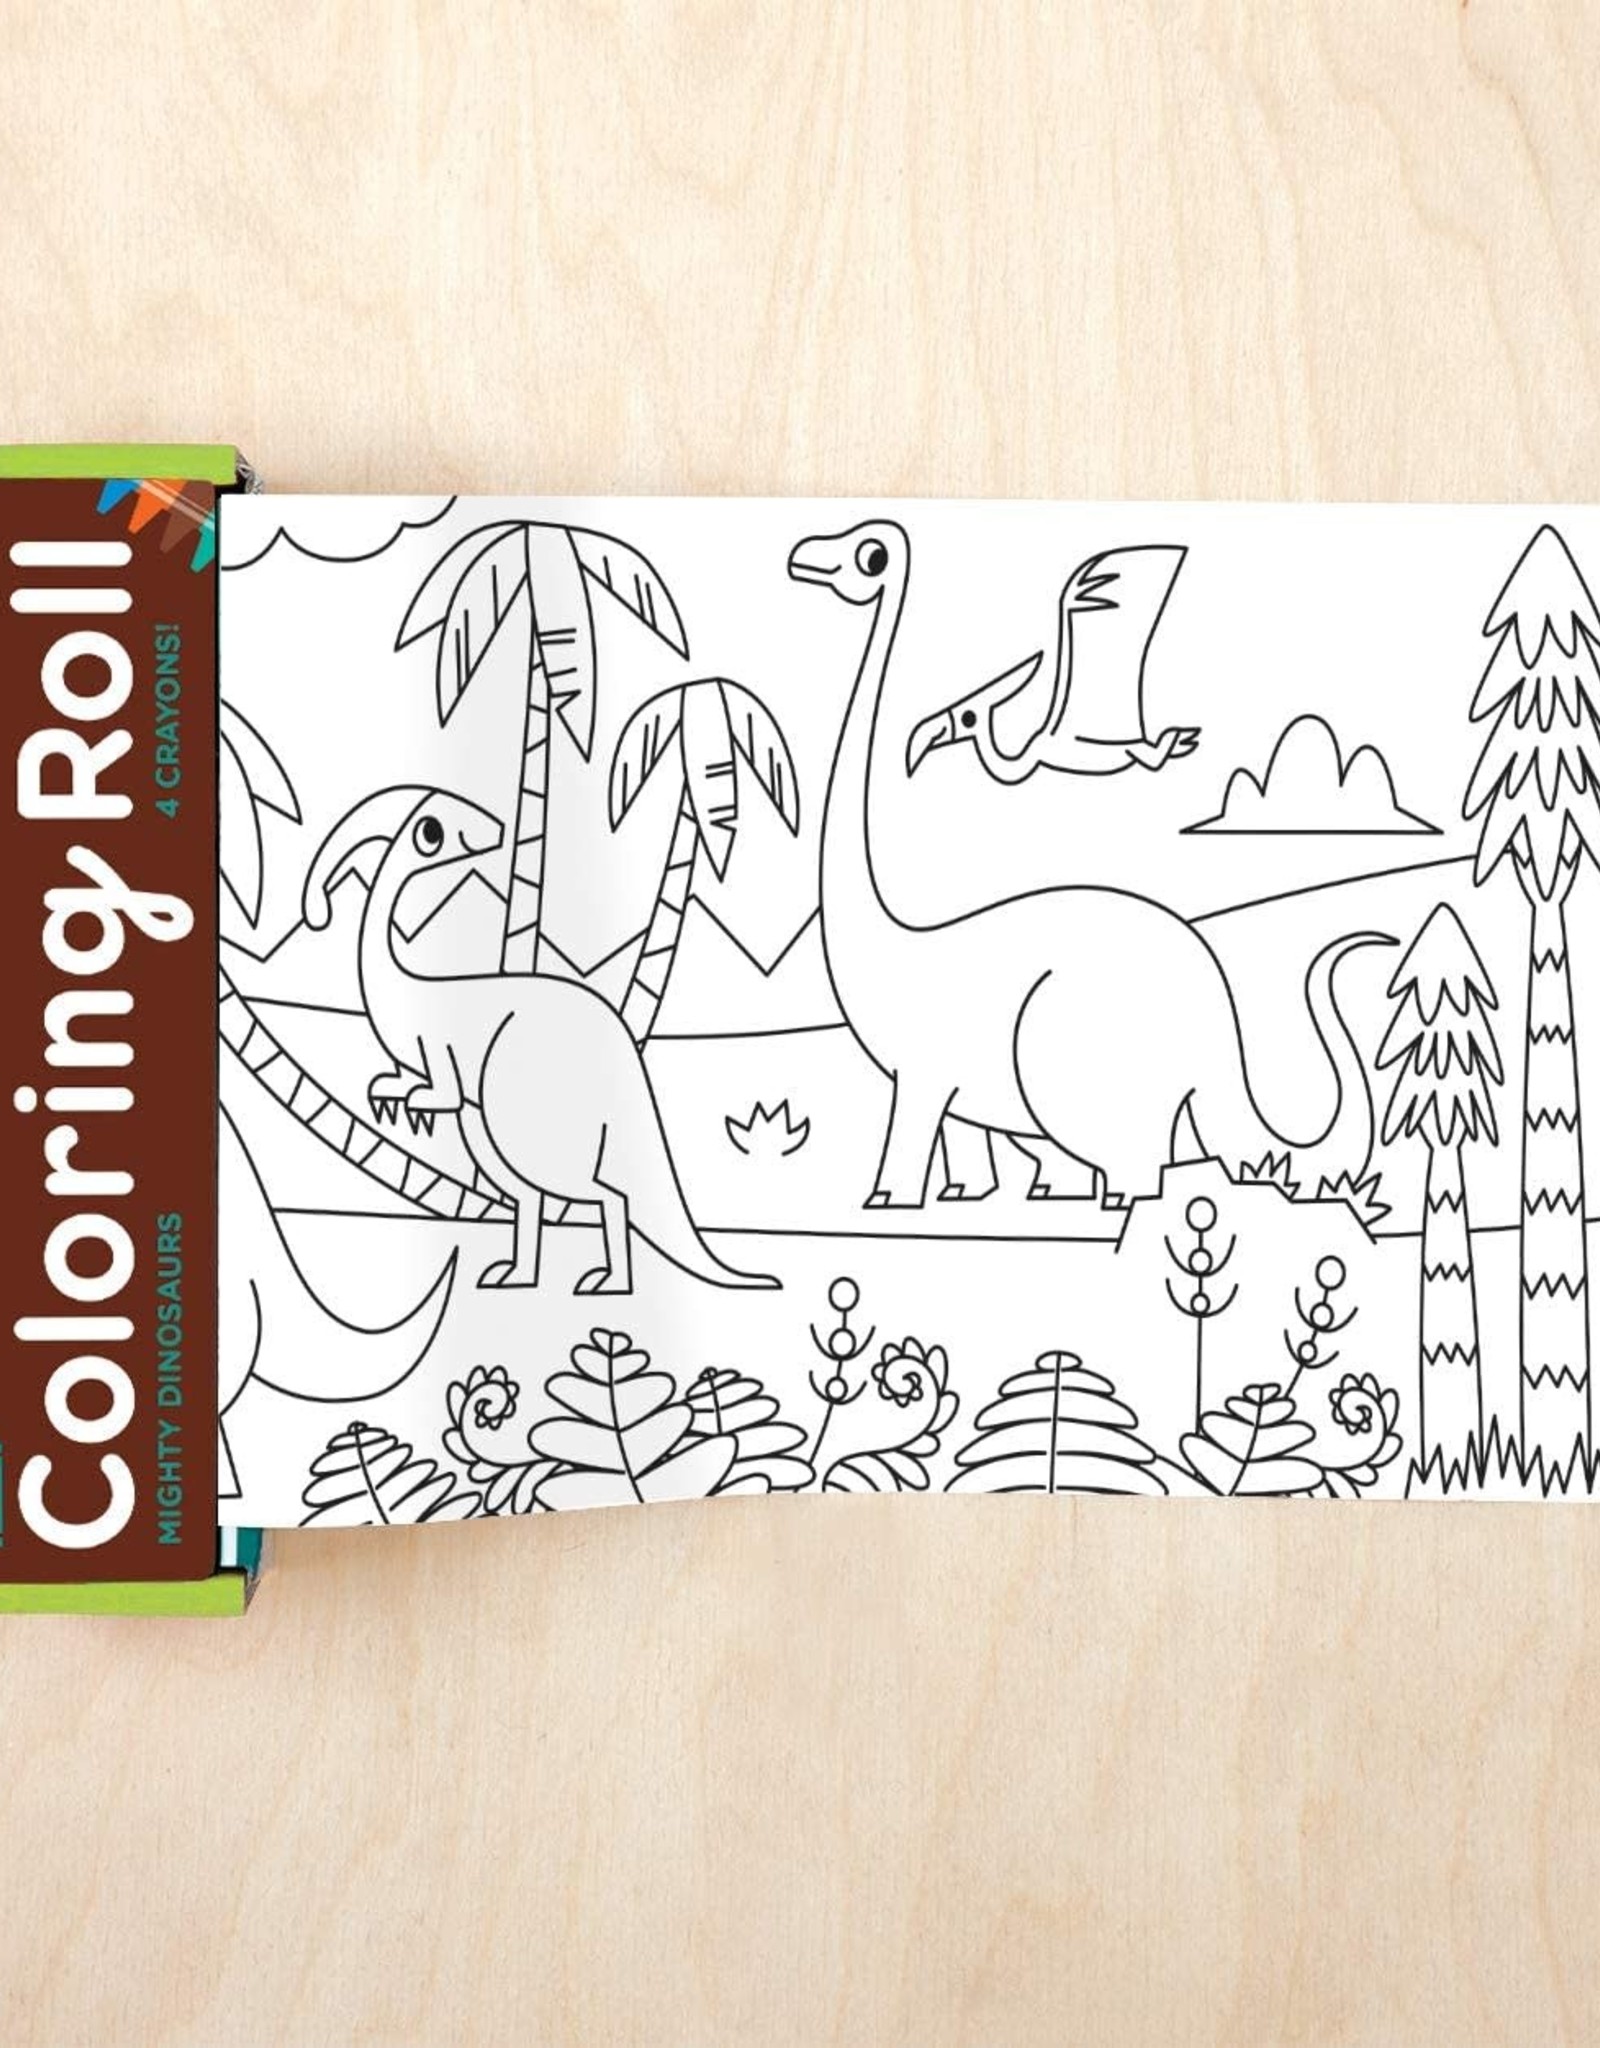 Mudpuppy Mini Coloring Roll - Mighty Dinosaurs